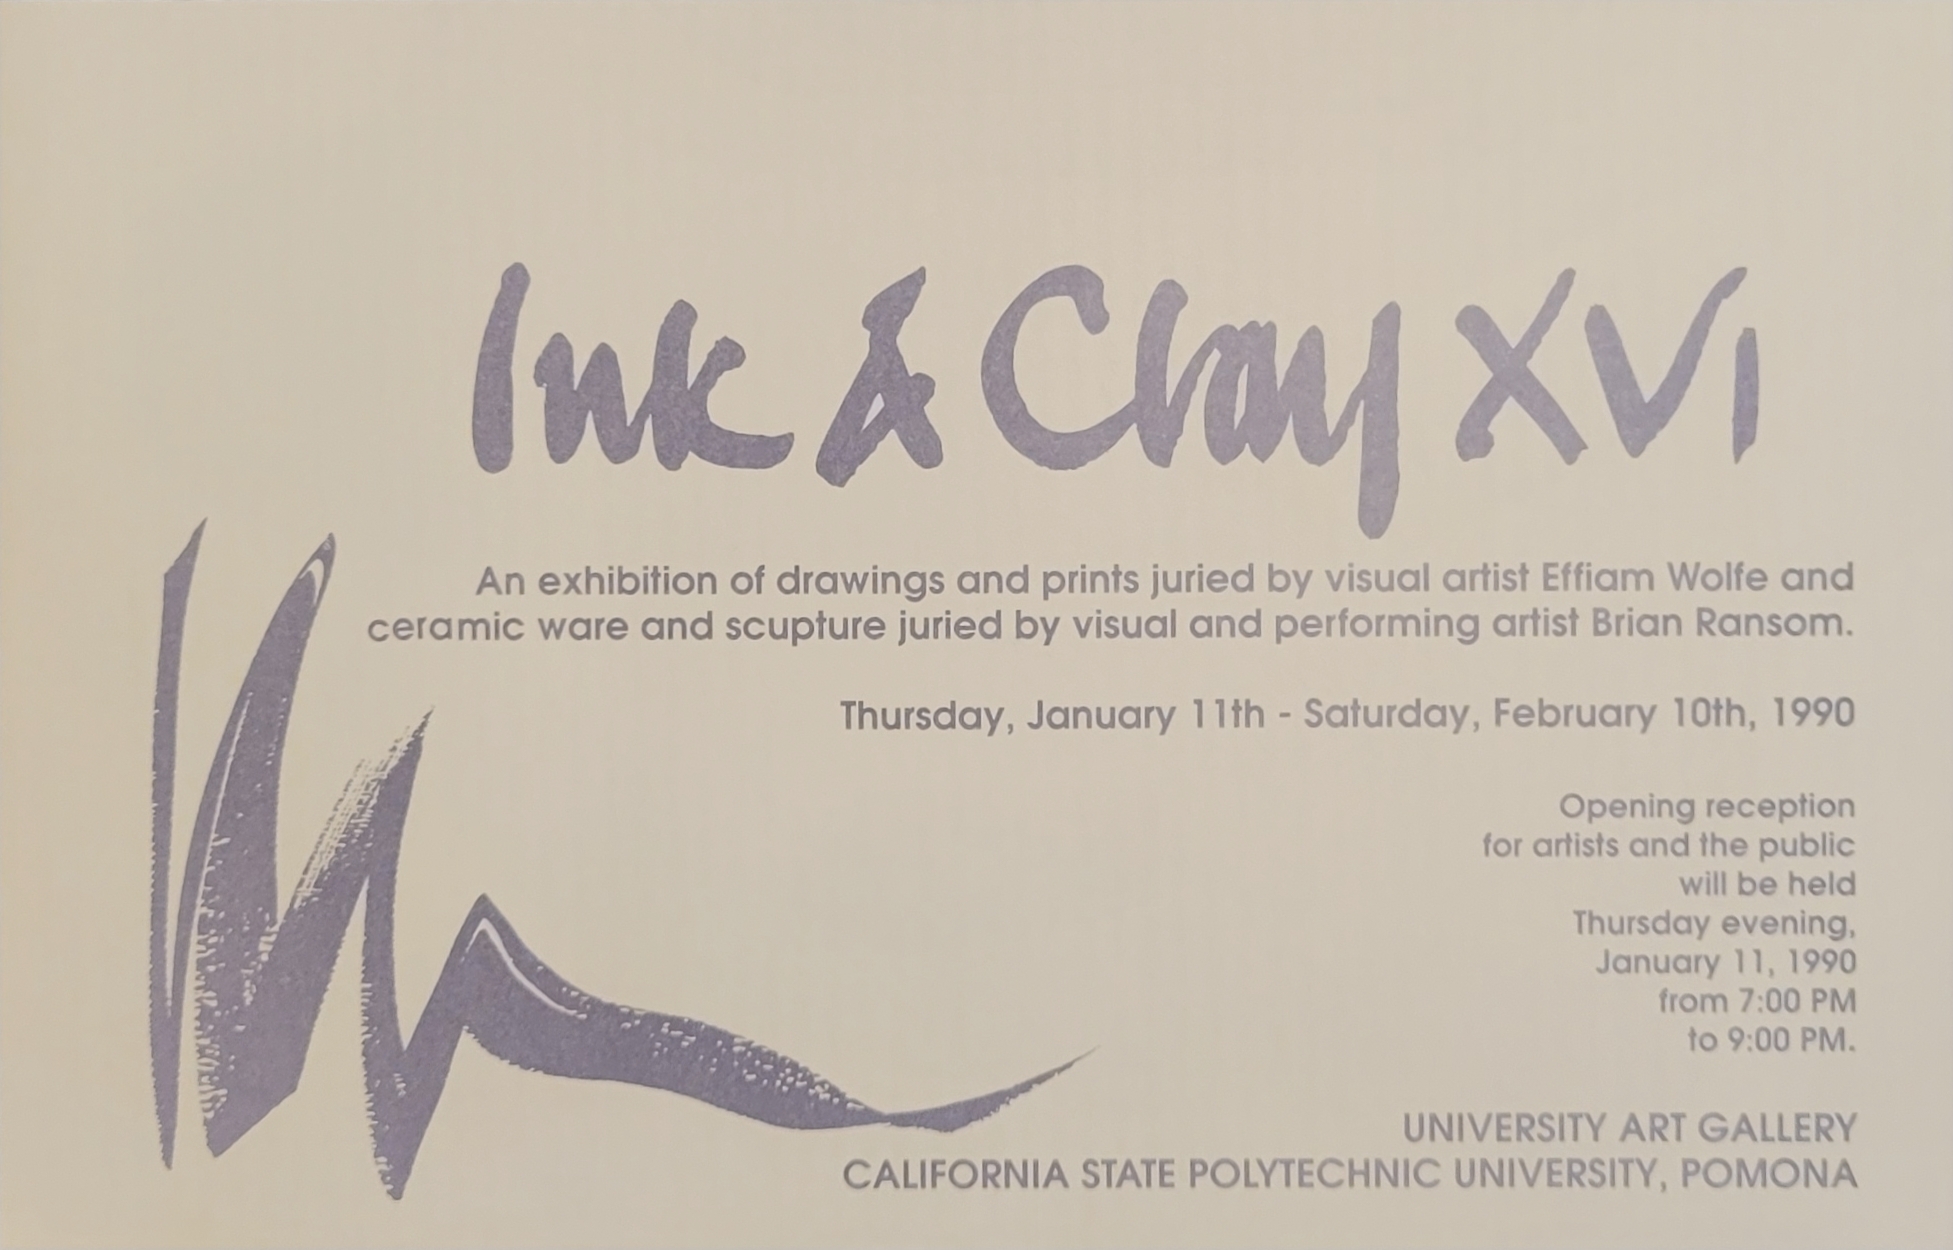 Thursday, January 11, 1990 - 7:00 PM to 9:00 PM Opening Reception: Ink & Clay 21